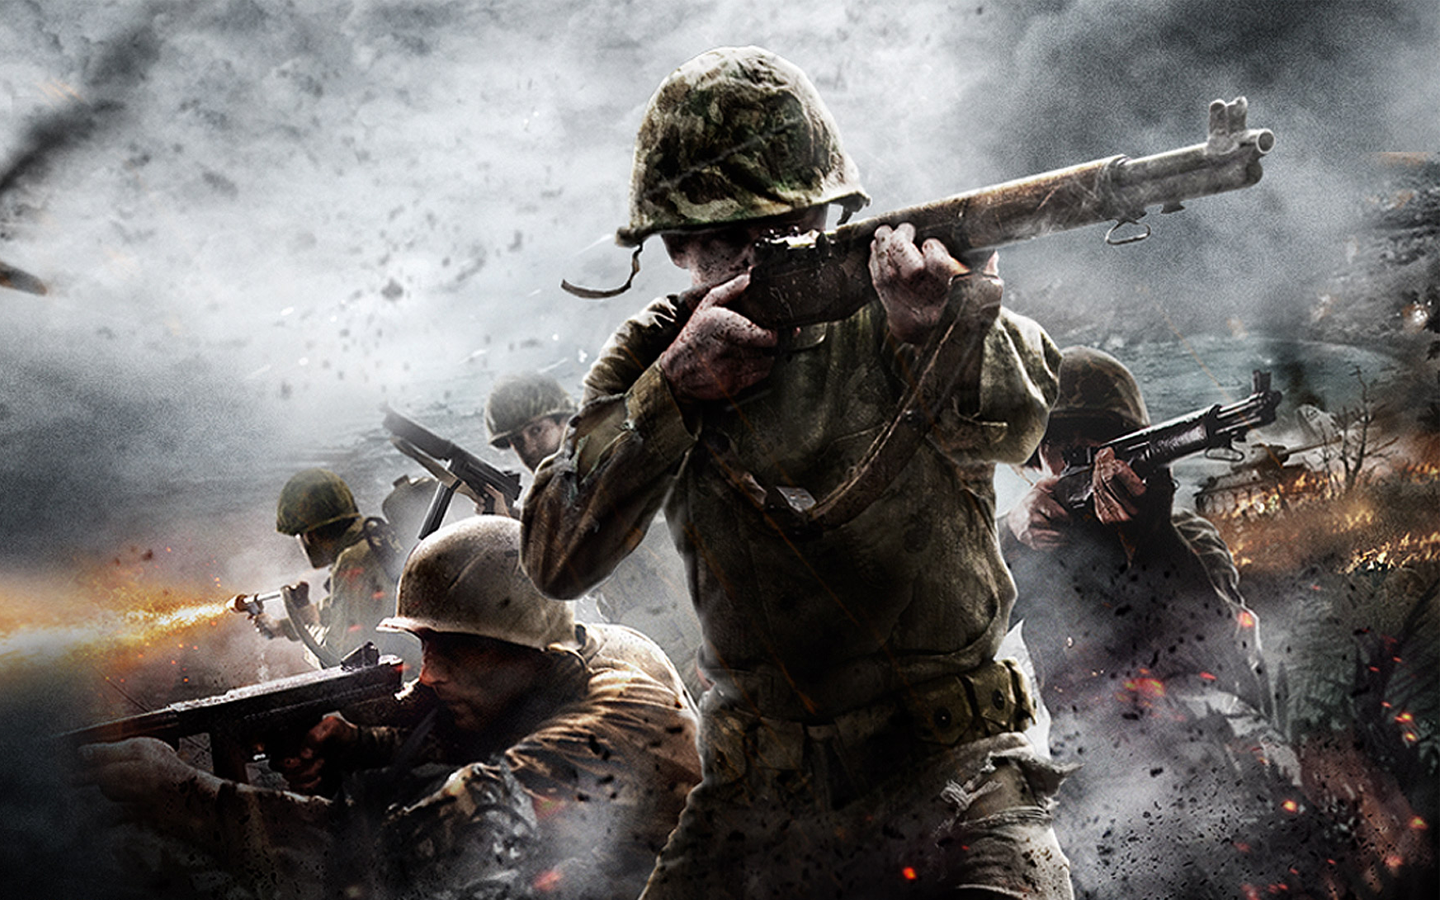 Army men world war ii army soldiers weapons wallpaper - (#181847 ...